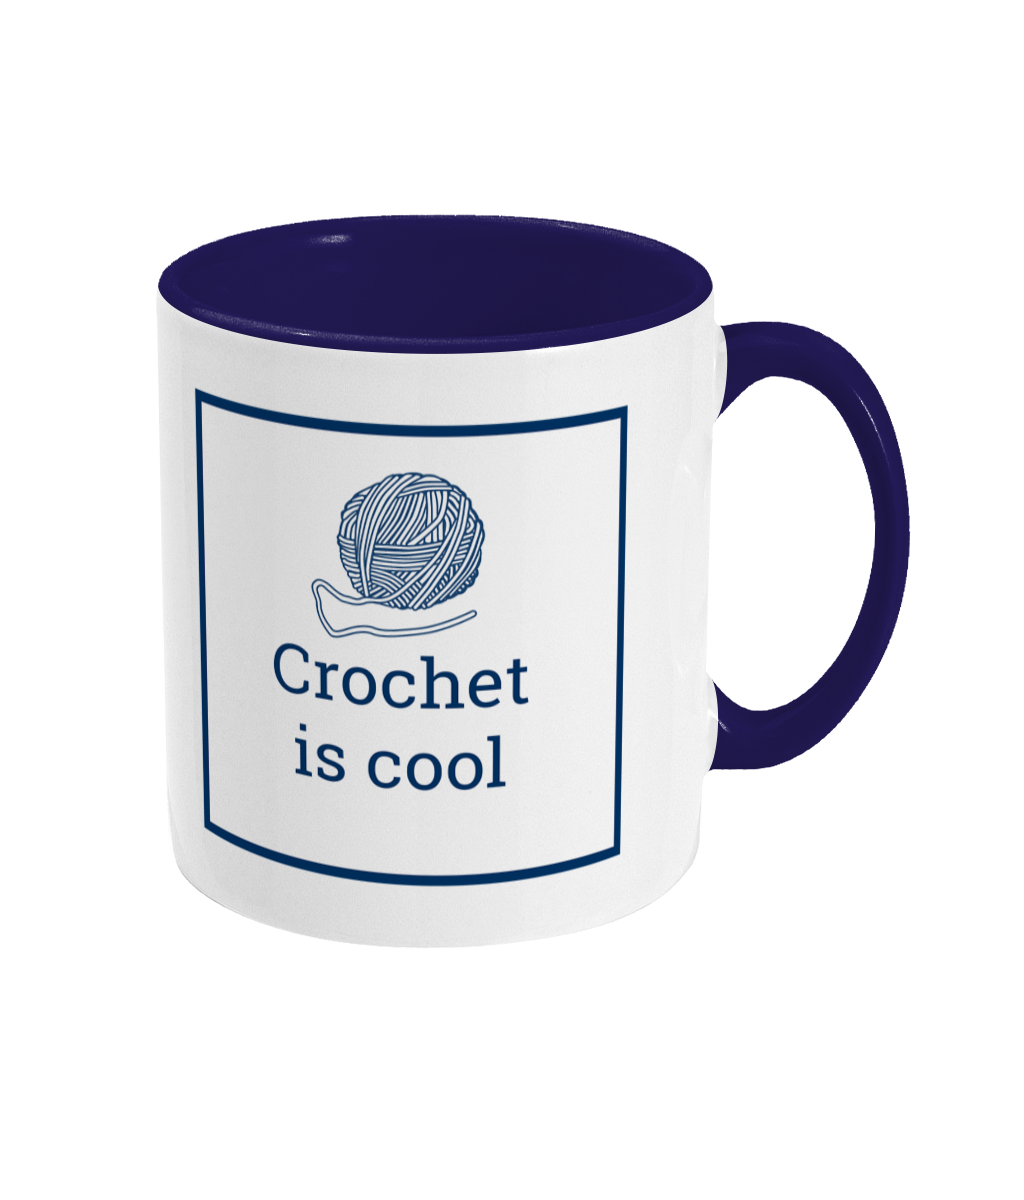 two tone blue and white ceramic mug crochet is cool